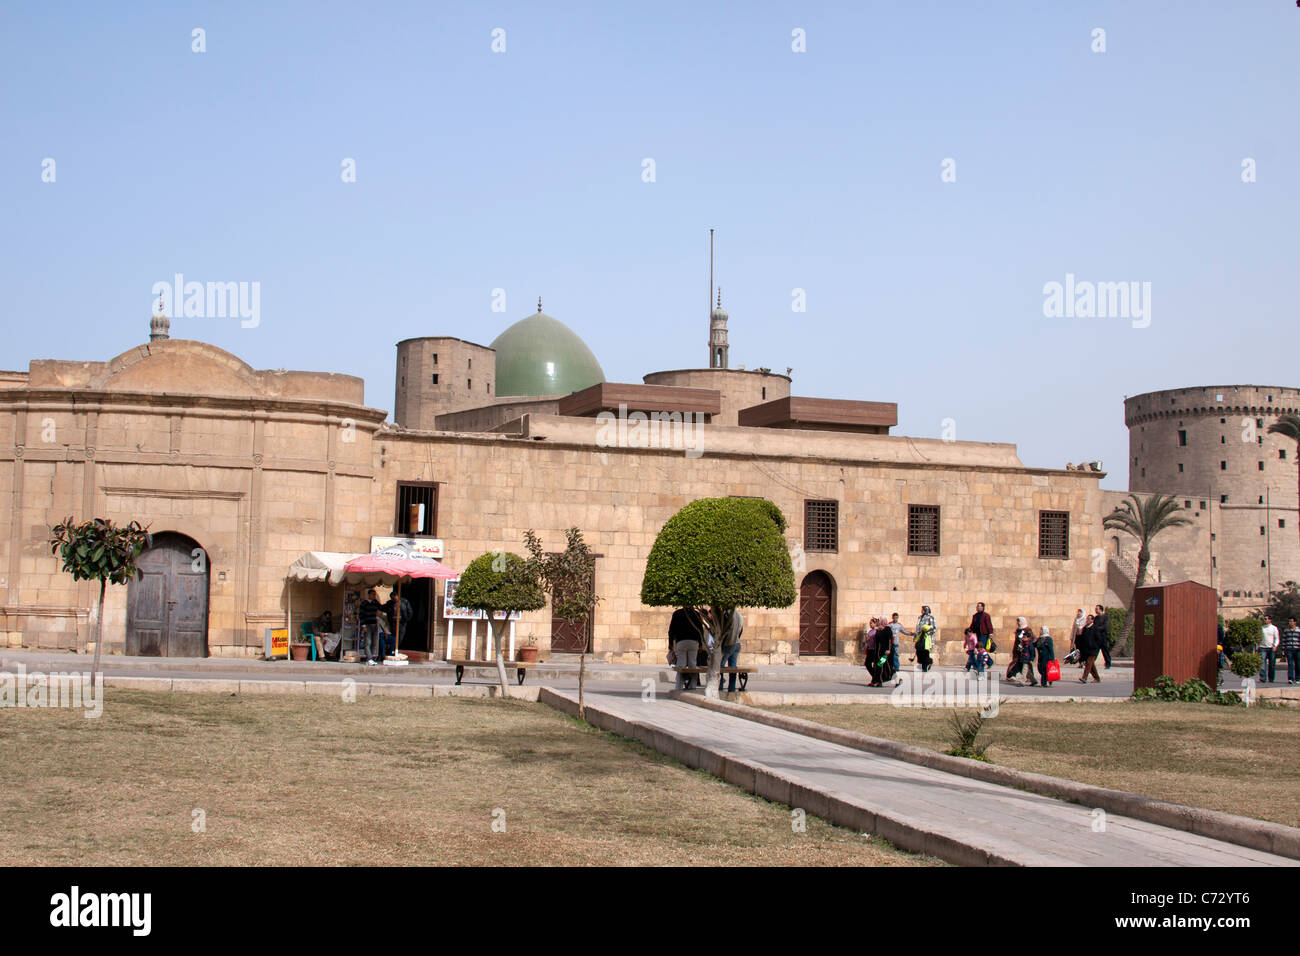 Buidings inside the Saladin Citadel in Cairo, with a museum and other buildings visible. The dome of a mosque also visible. Stock Photo